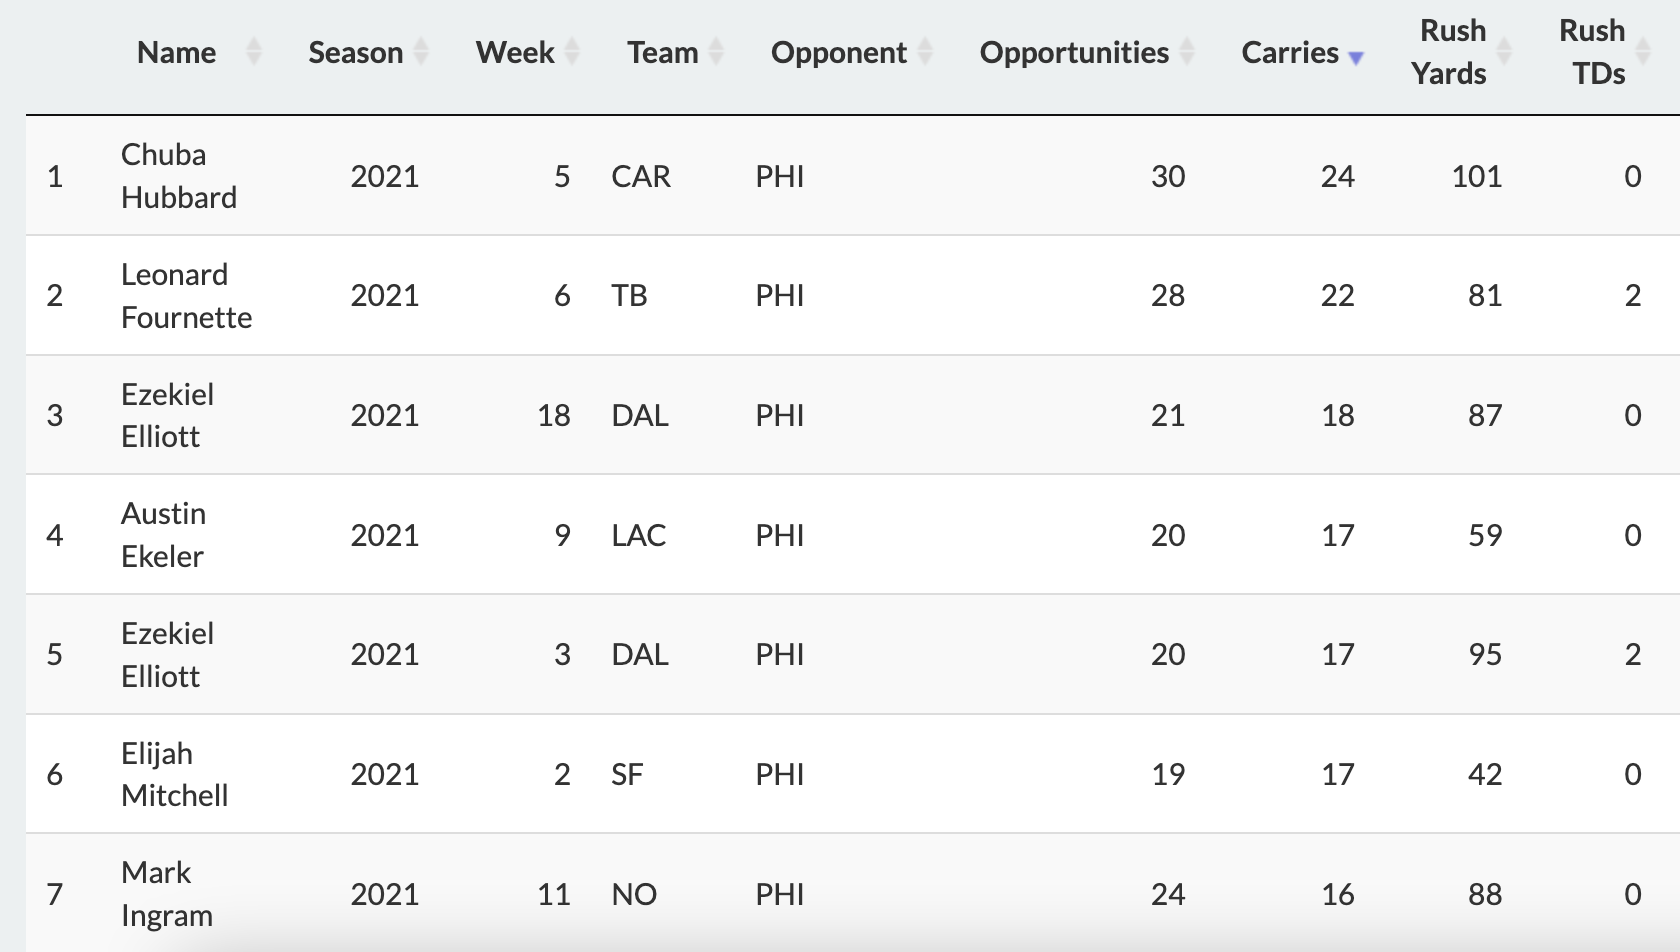 Players that saw more than 15 rush attempts vs. Philadelphia in 2021.